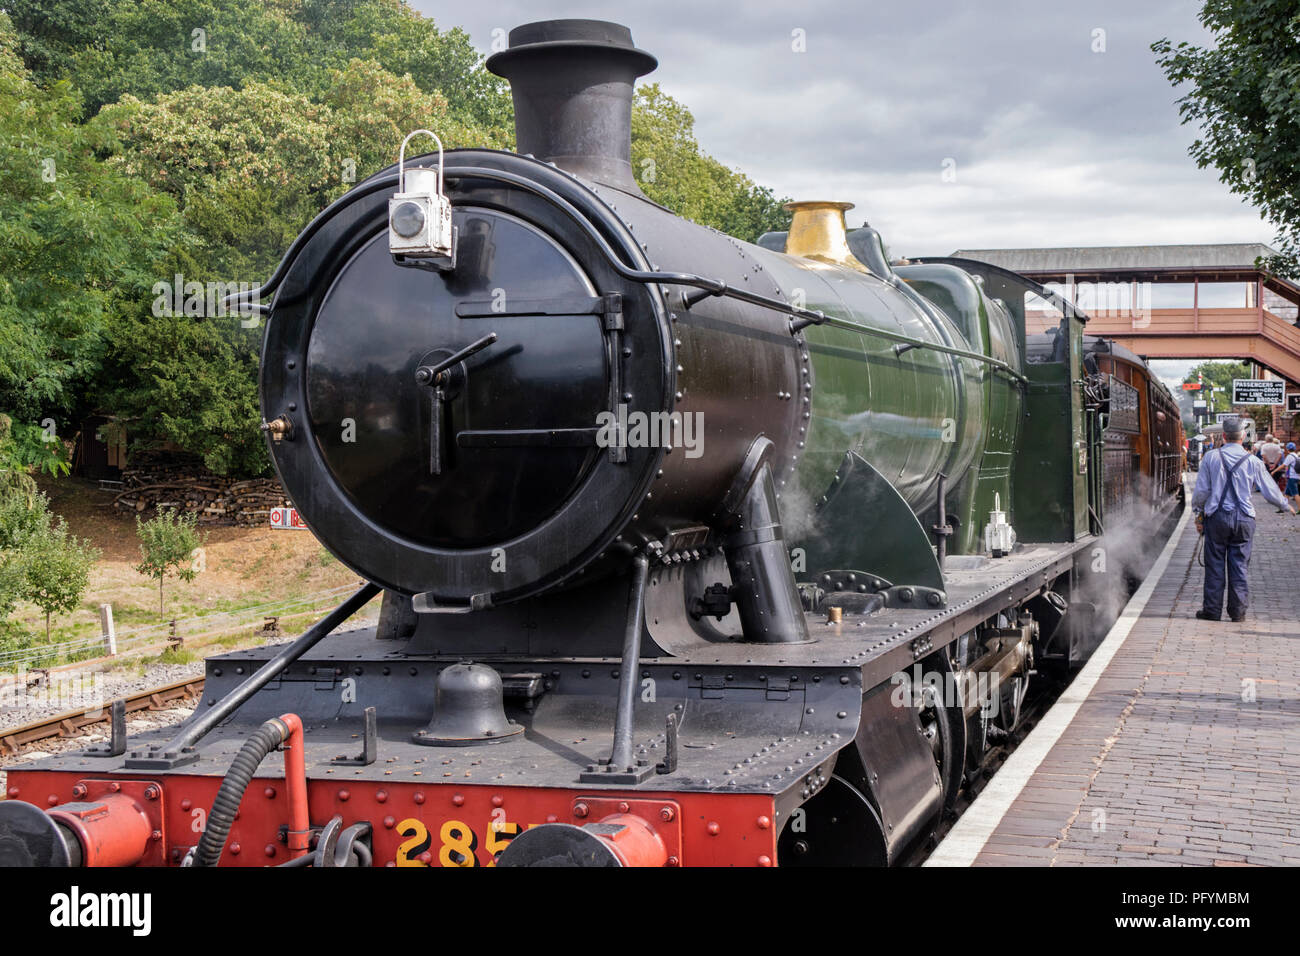 A steam train at Bewdley station on the Severn Valley Railway, Bewdley, Worcestershire, England, UK Stock Photo